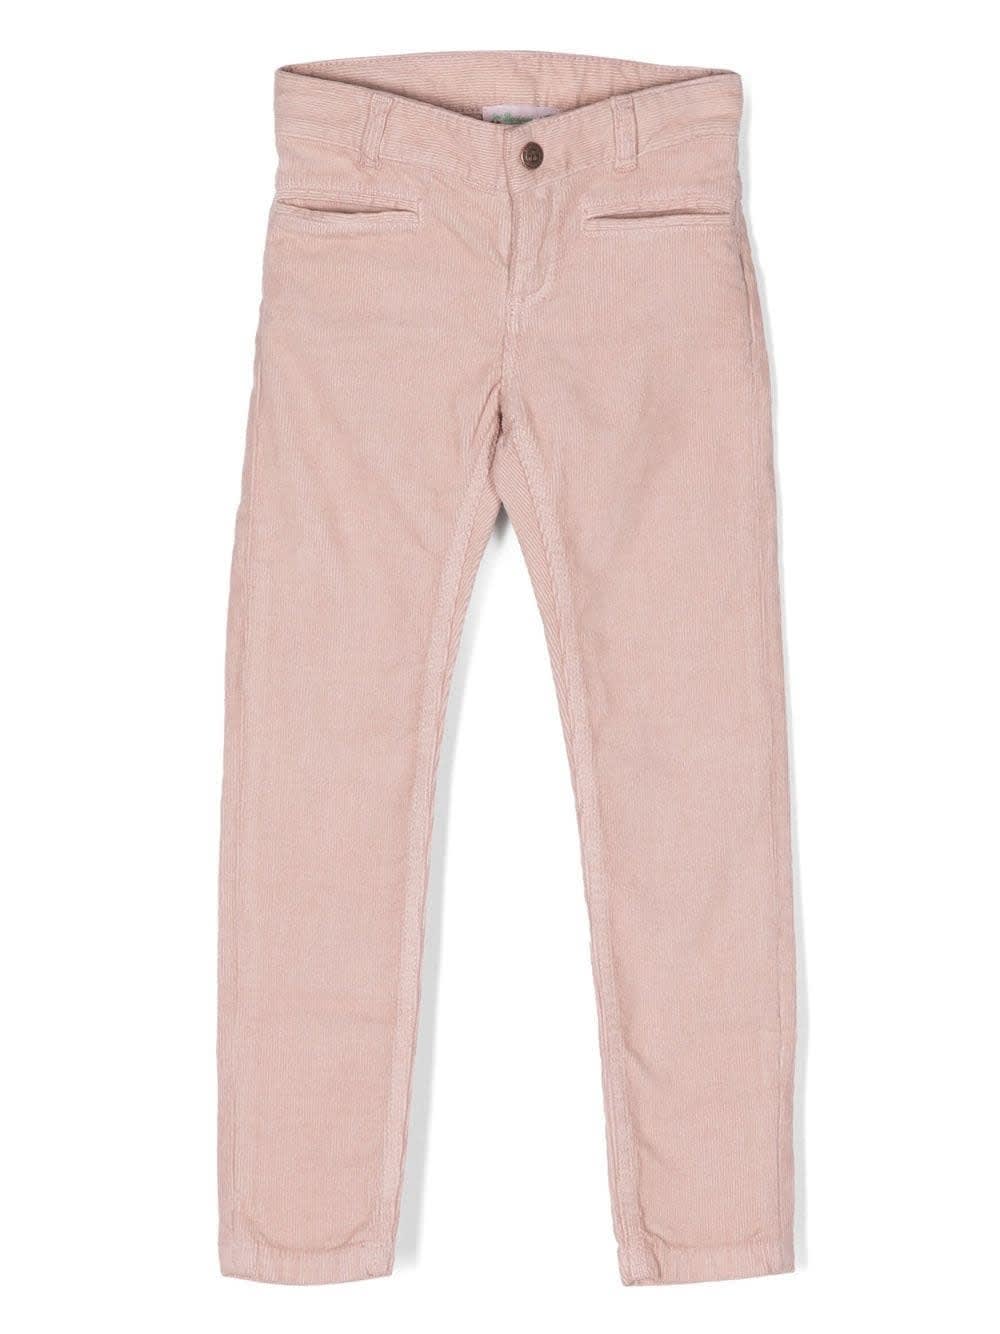 BONPOINT PALE PINK BROOK TROUSERS